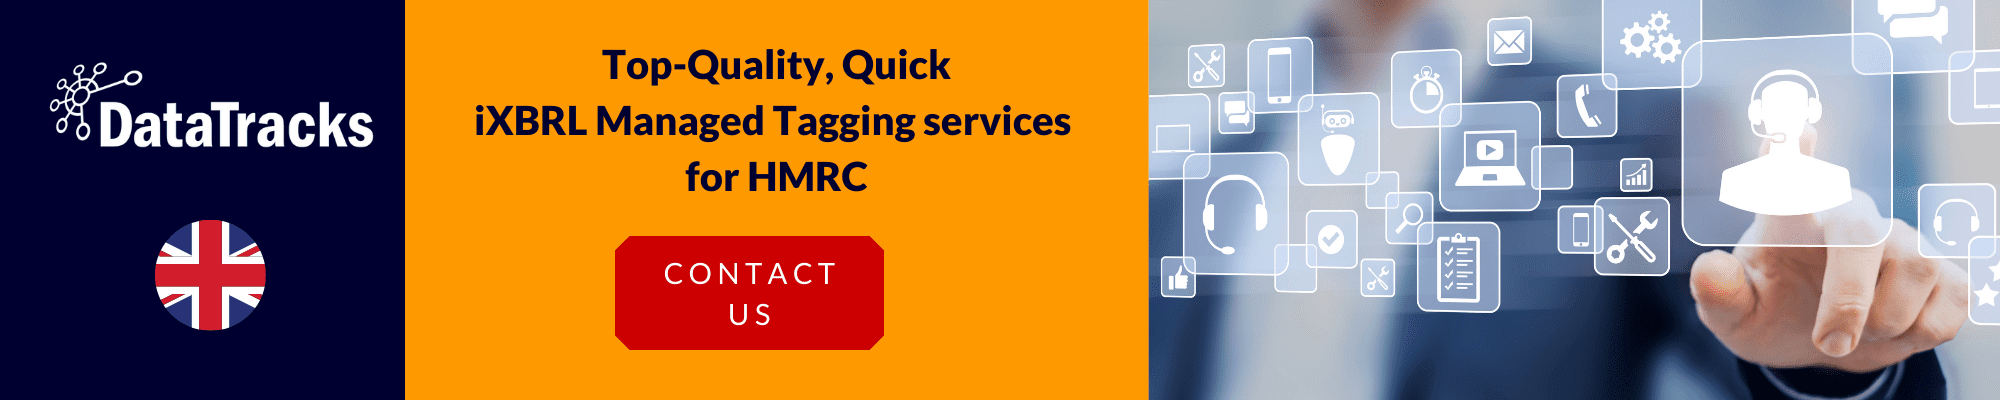 XBRL managed tagging services for HMRC